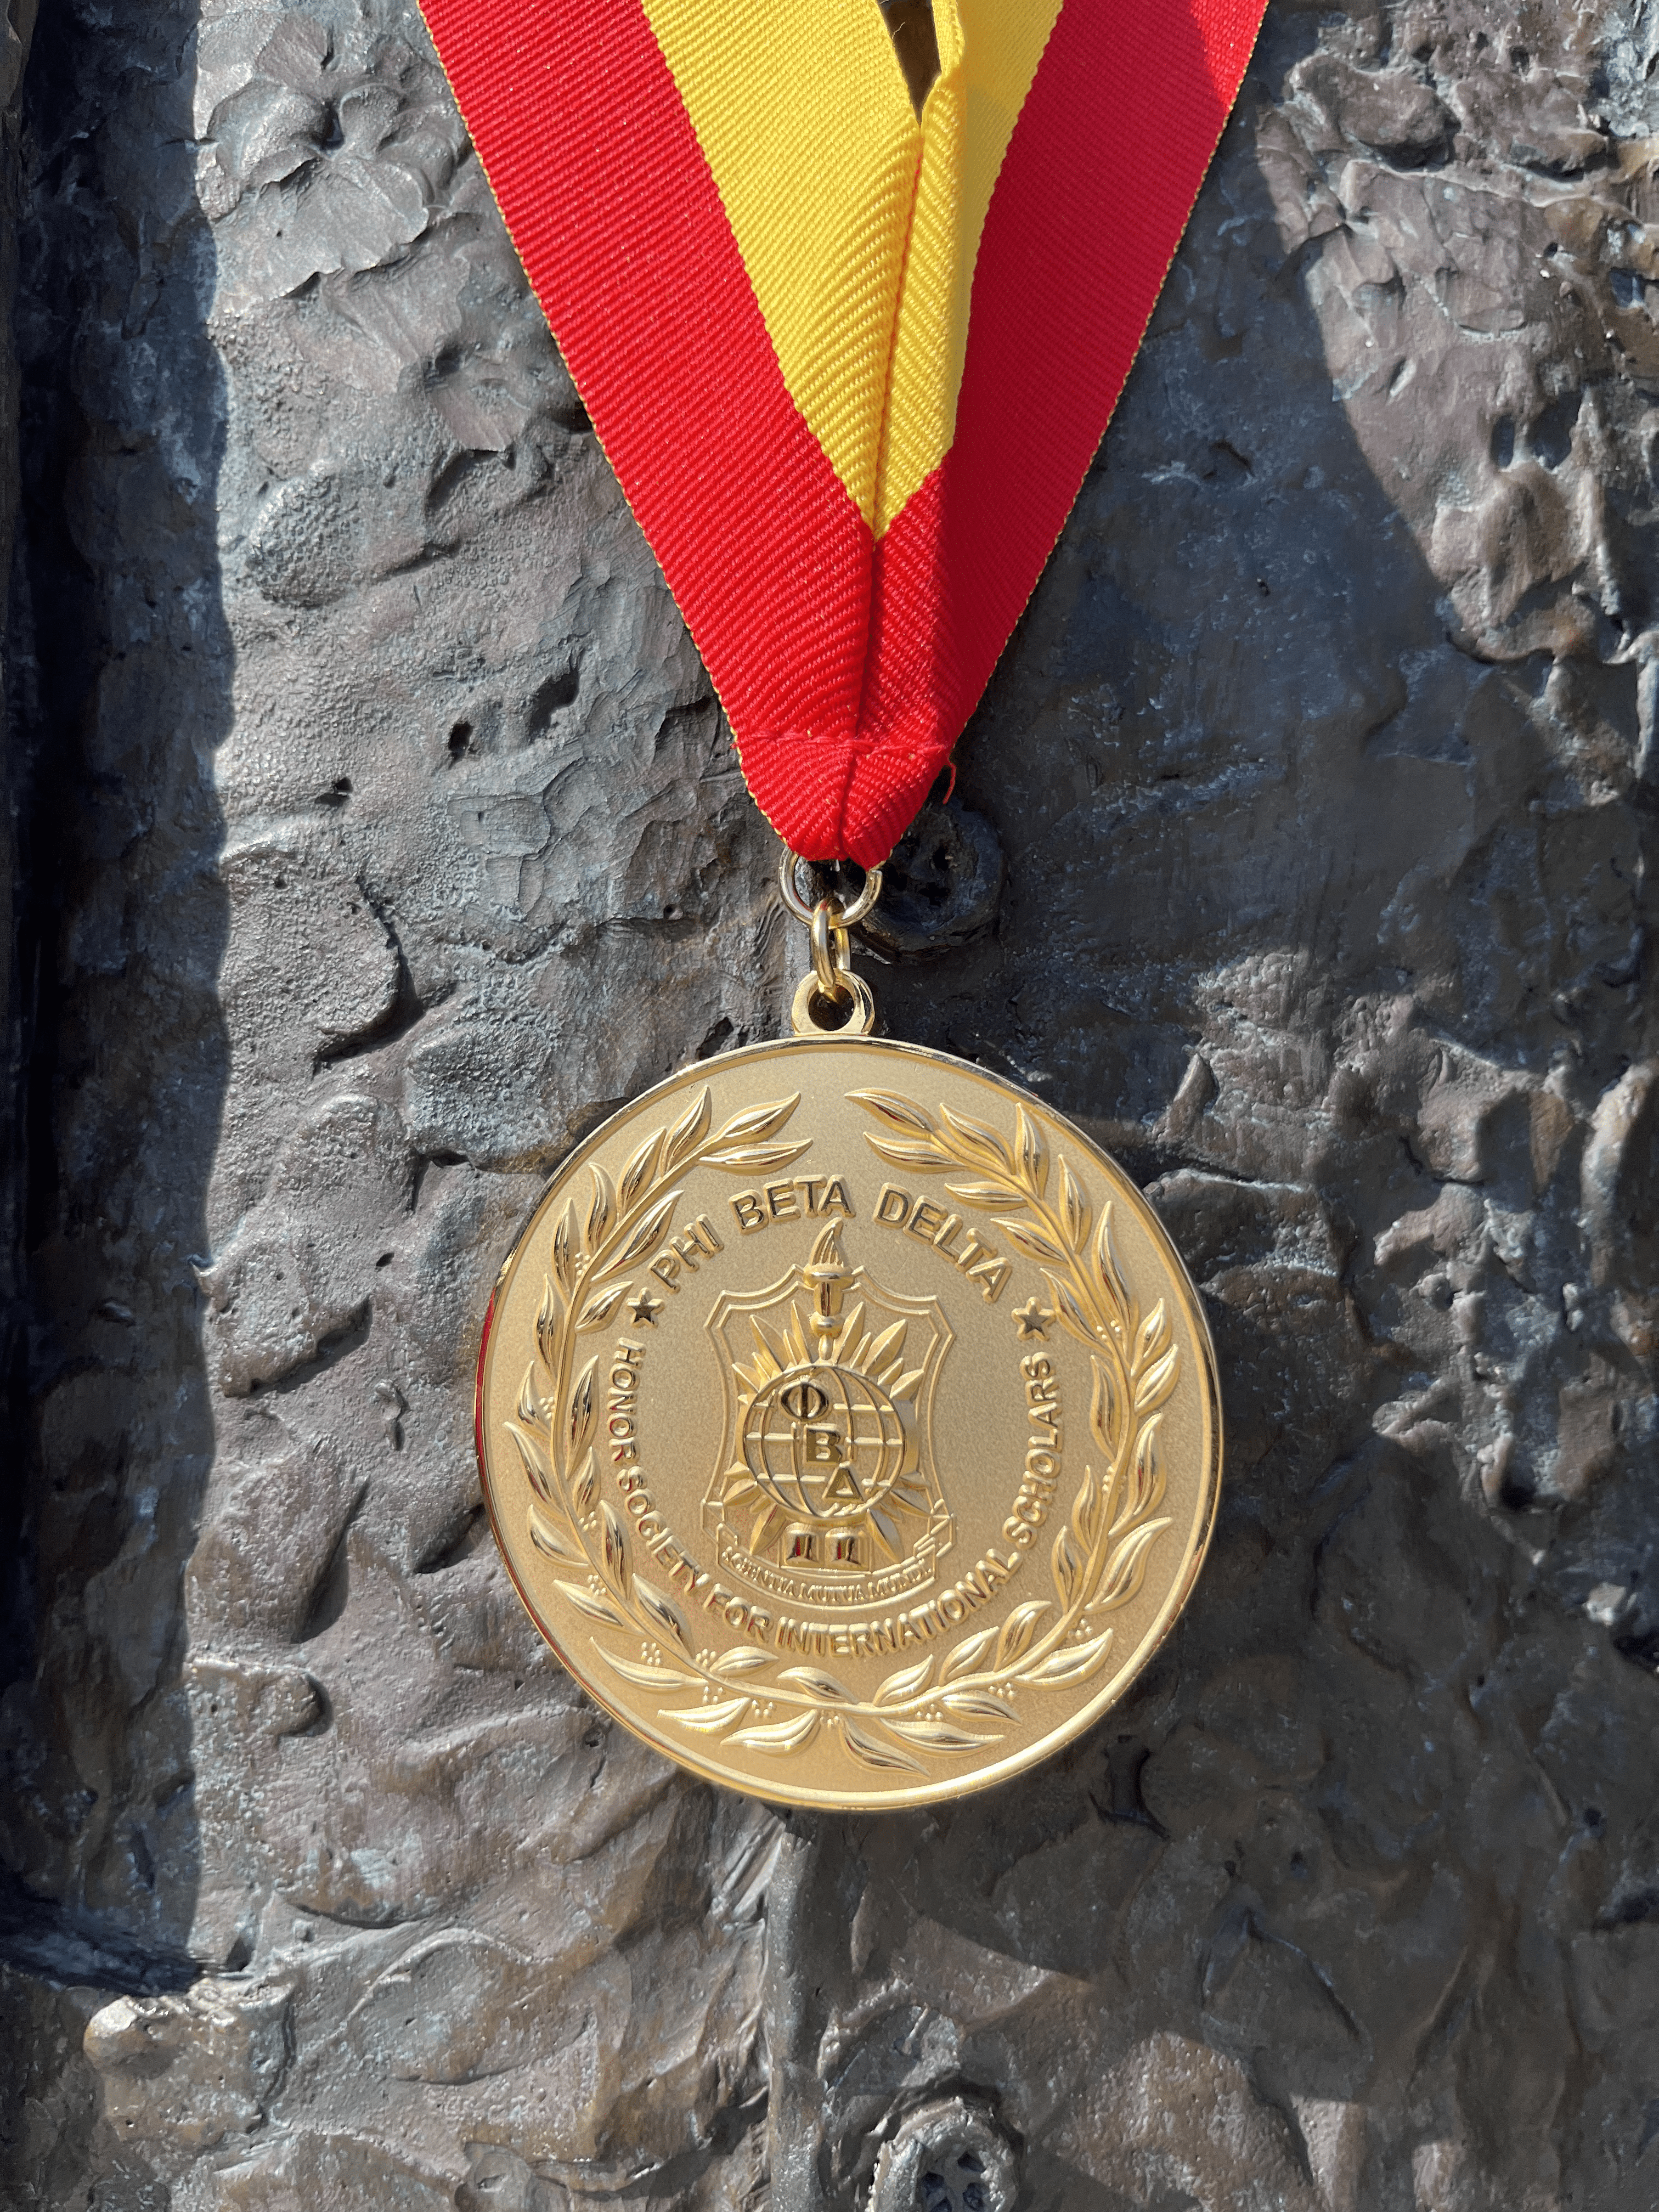 A gold circular medal hanging from a red and yellow ribbon.